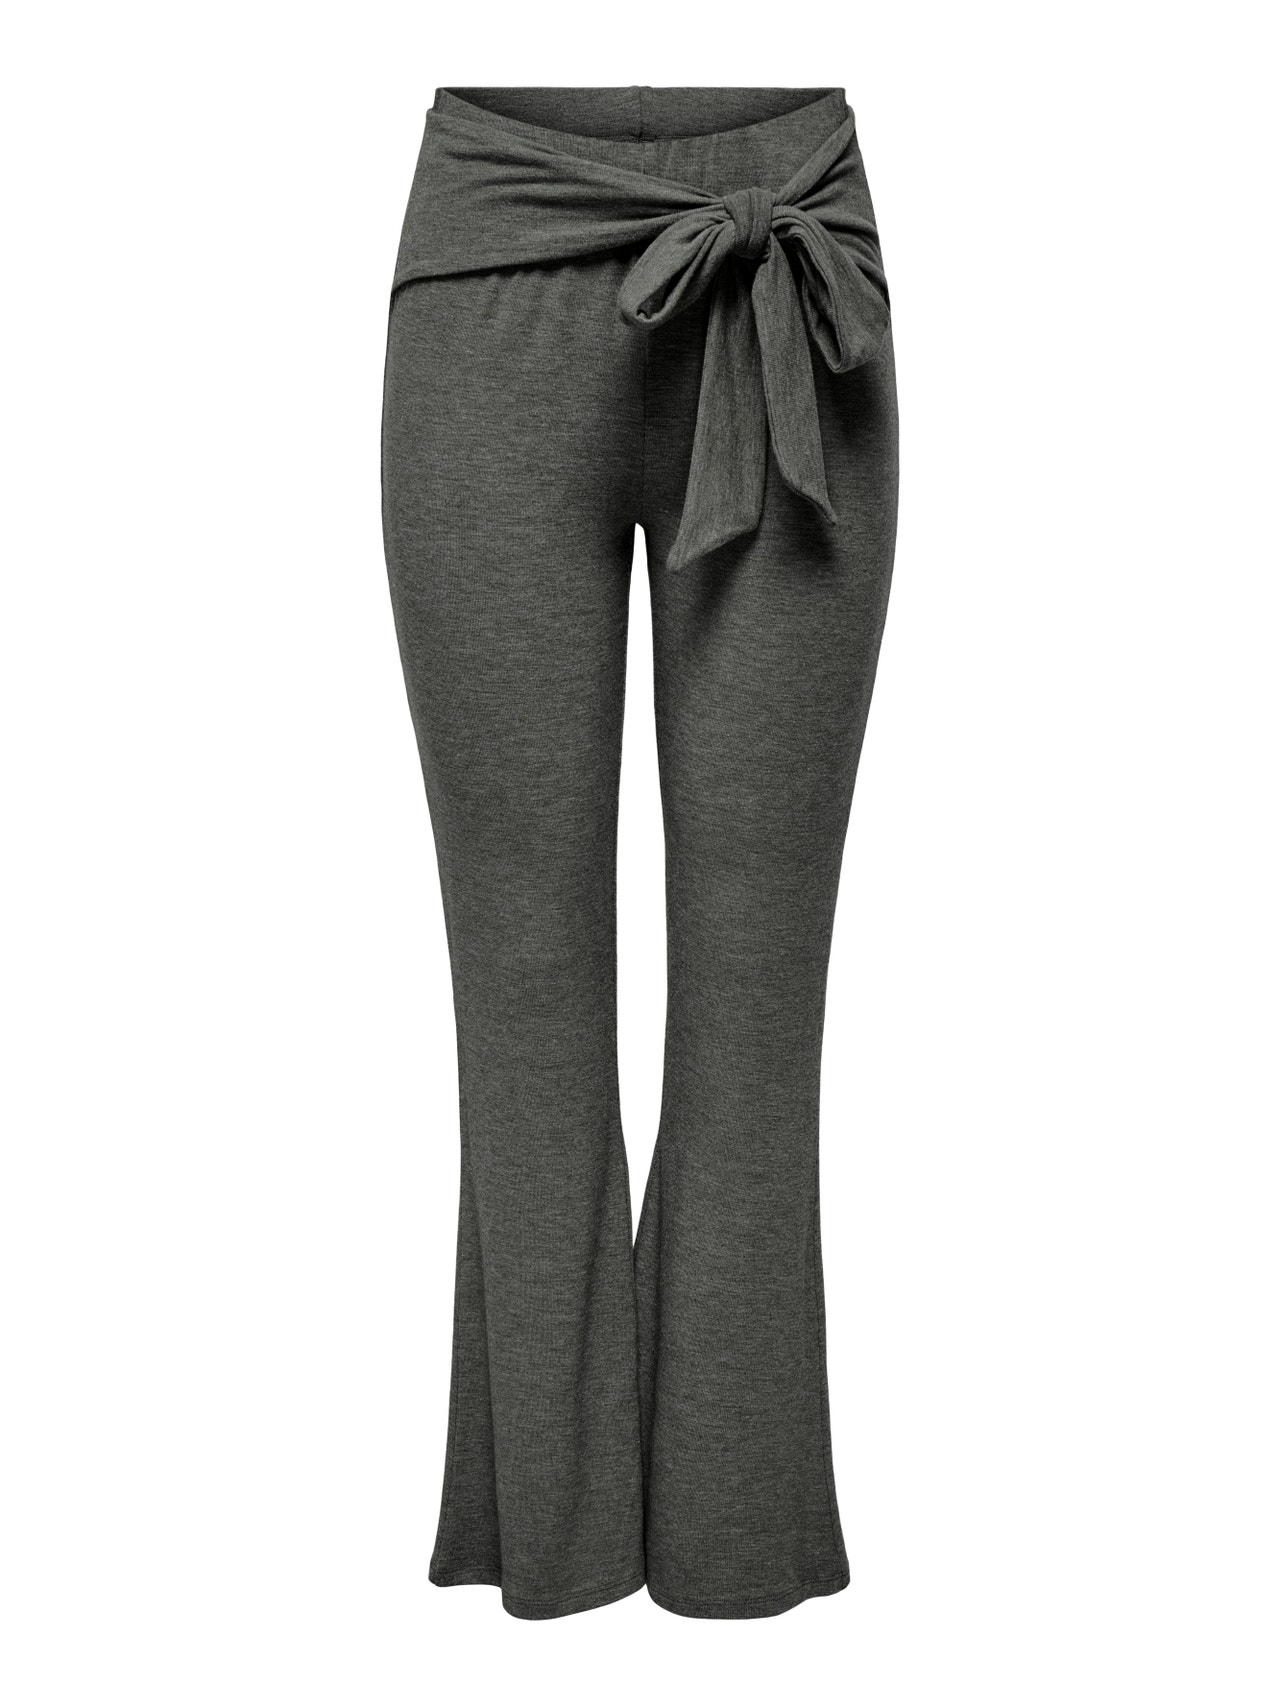 ONLY Trousers with bow detail -Black - 15332970